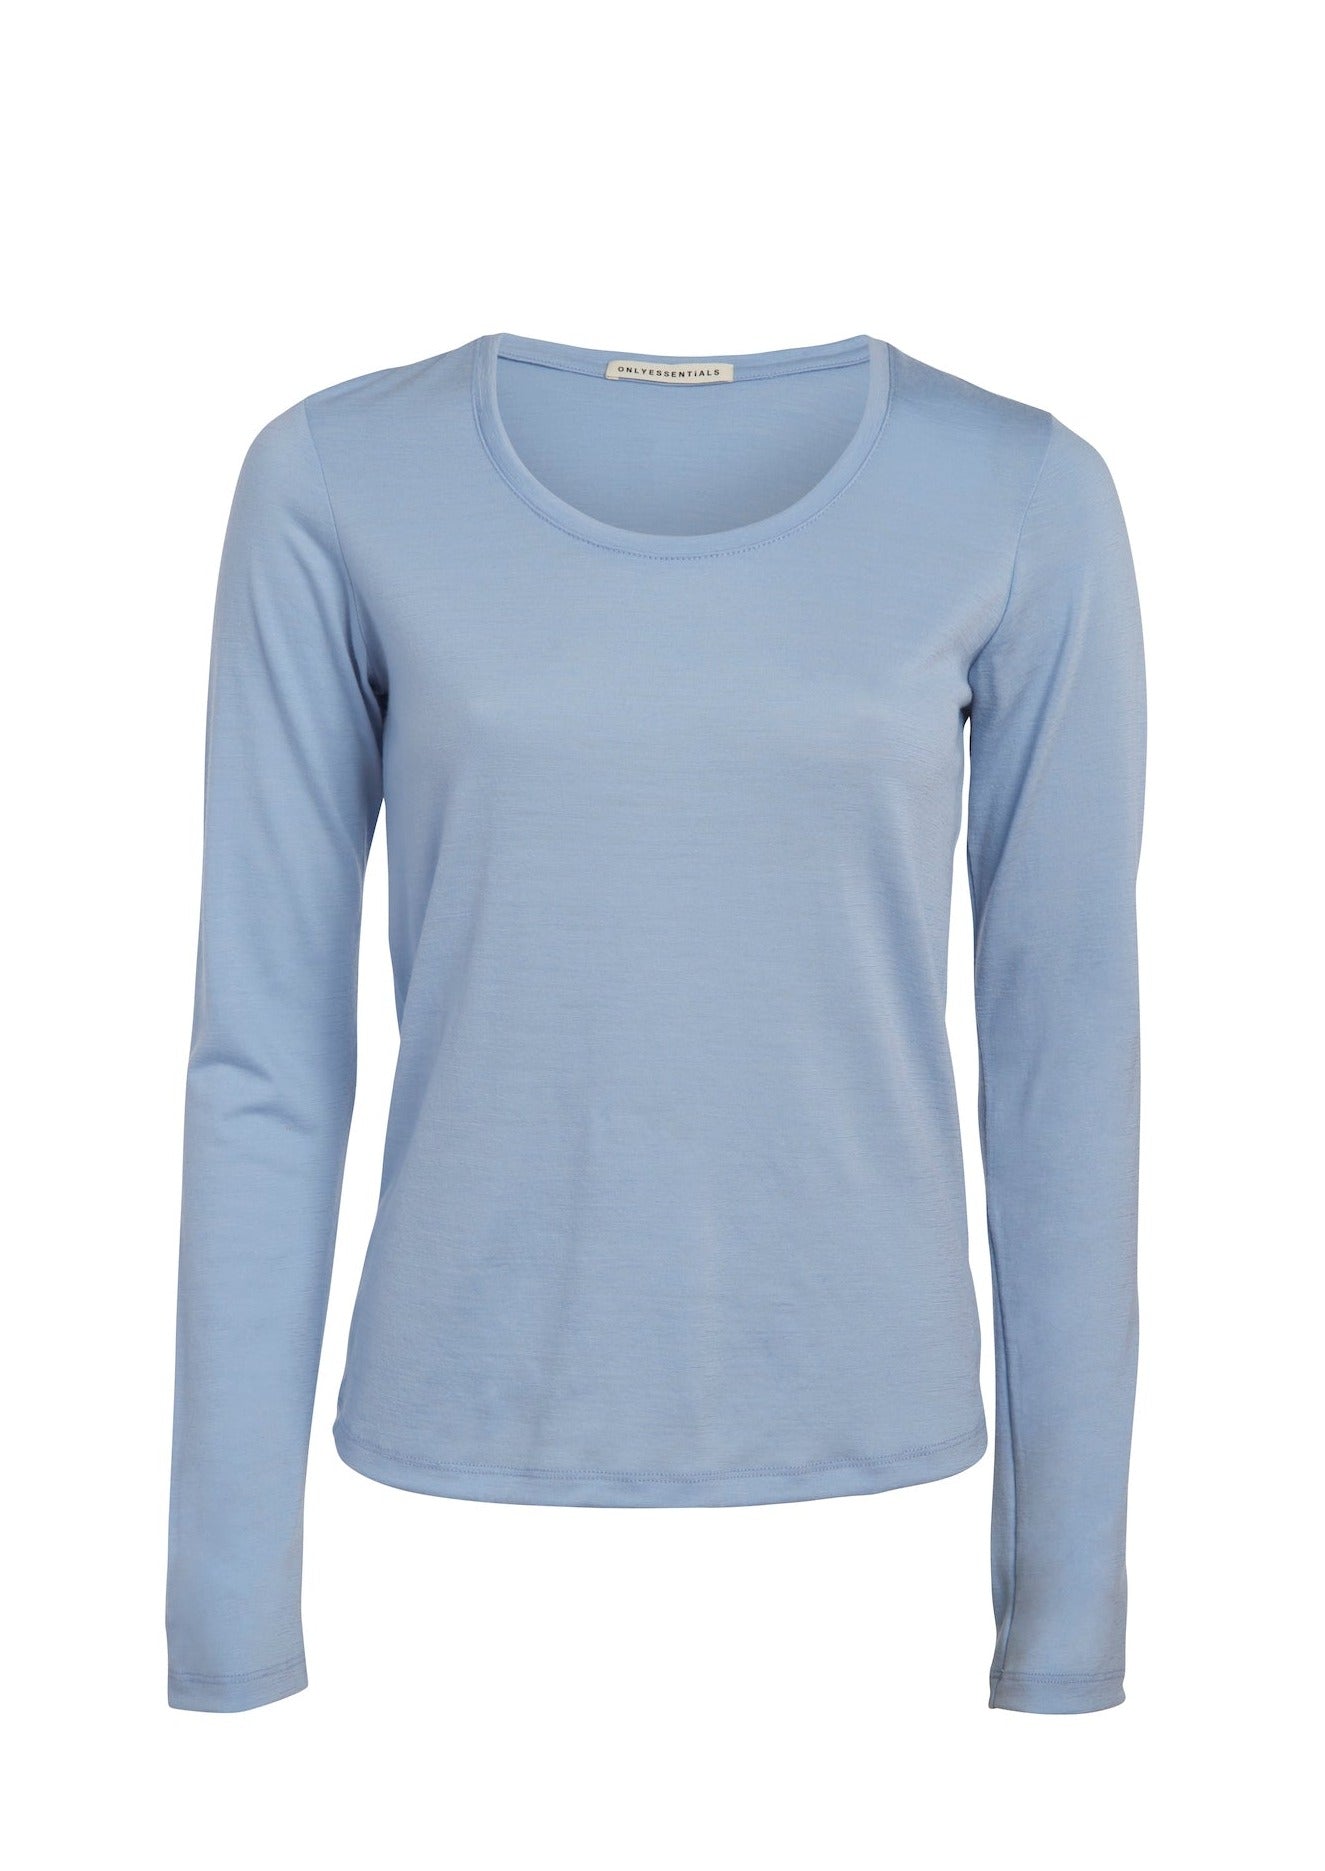 Detailed with a scoop neckline, this layering essential is soft and breathable to wear all seasons. 